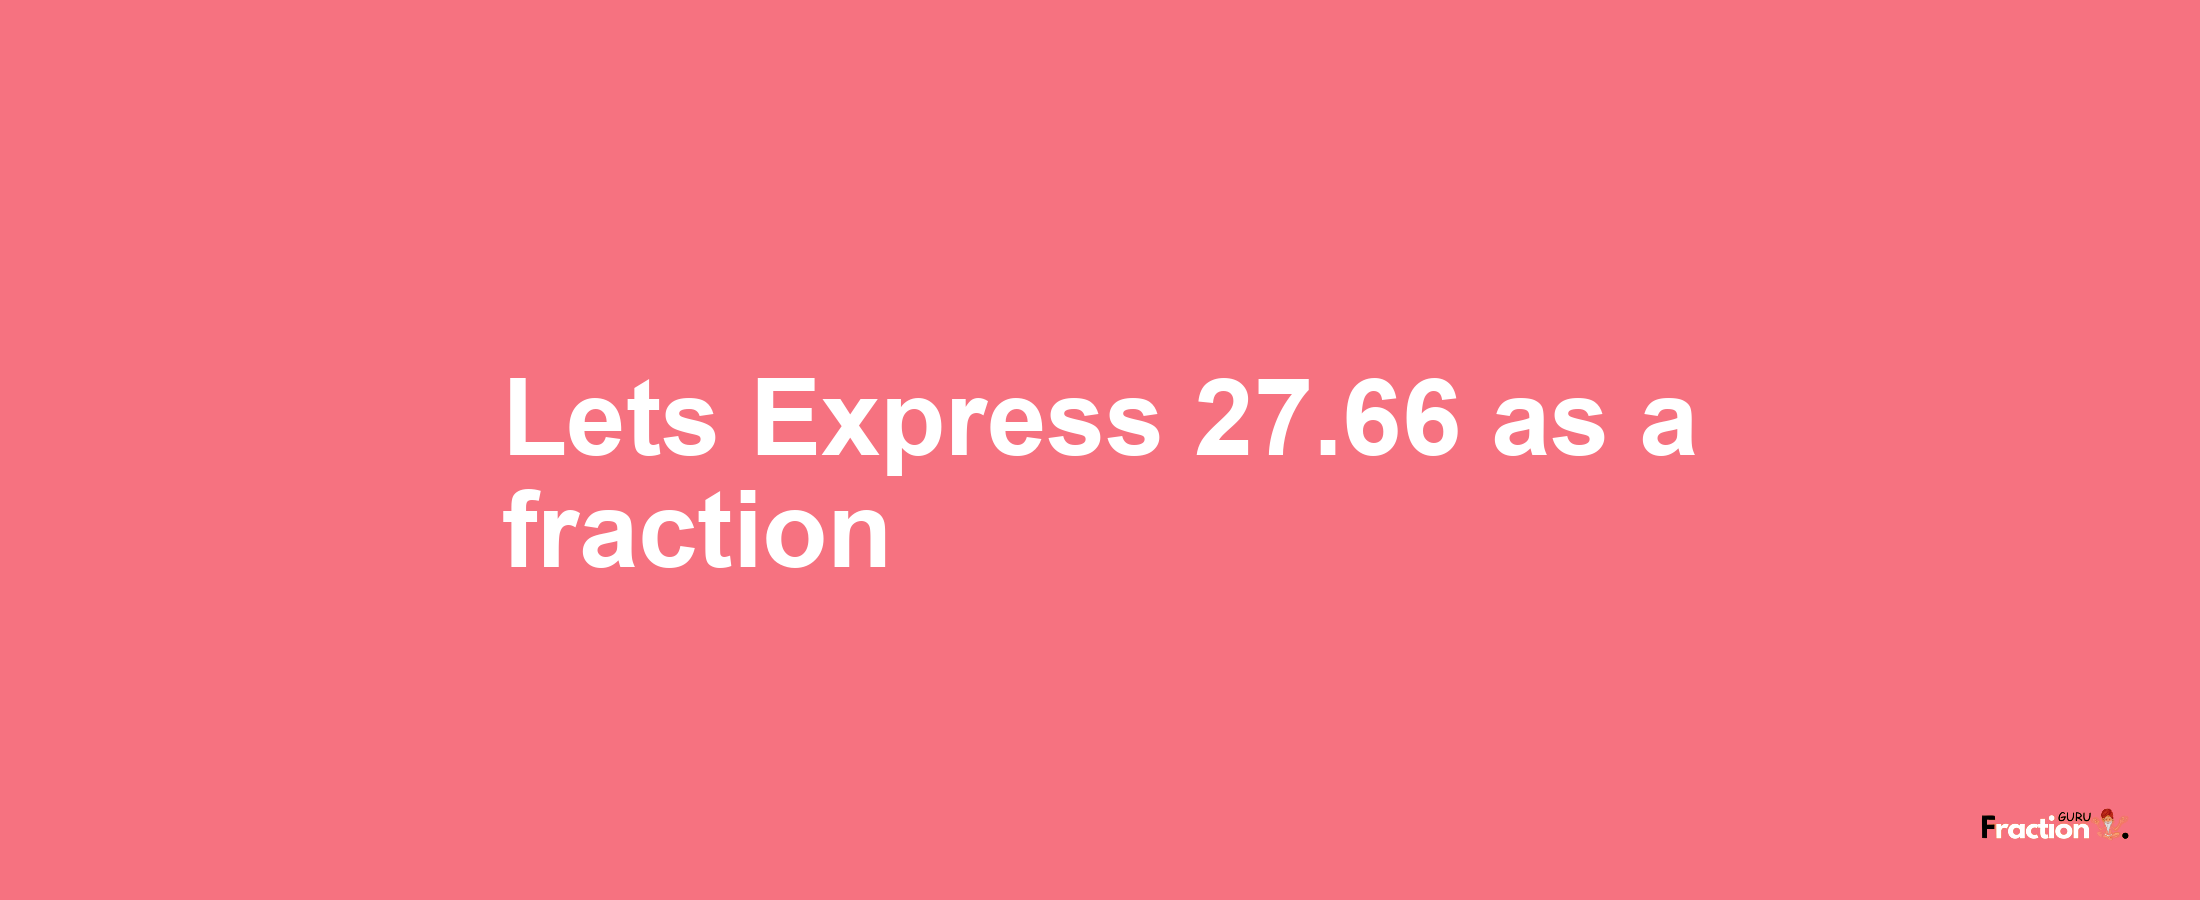 Lets Express 27.66 as afraction